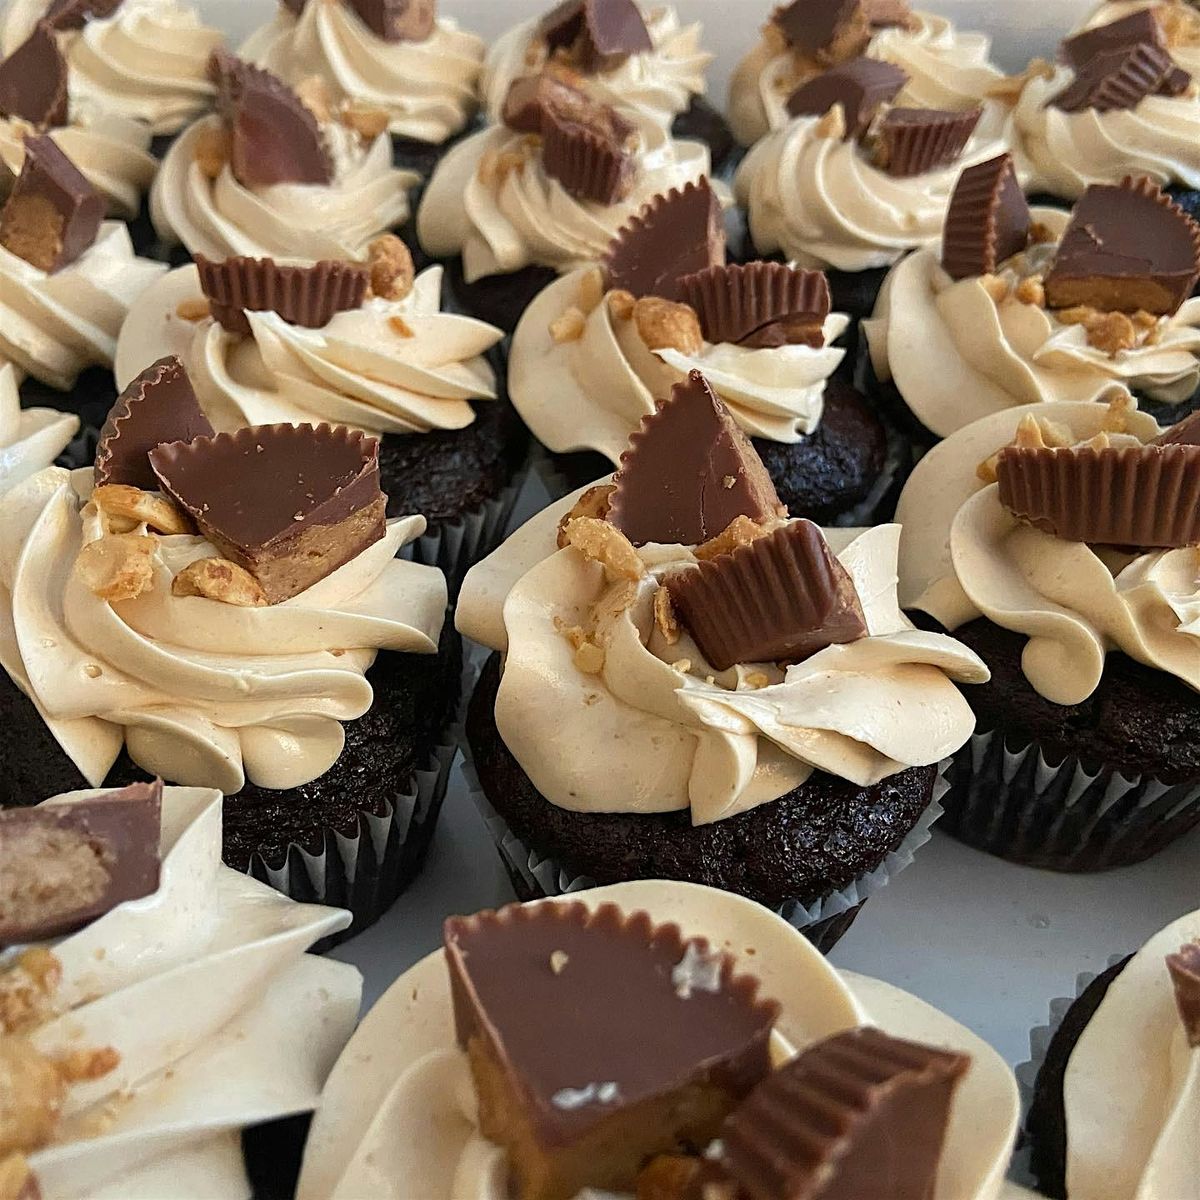 Annie's Signature Sweets IN PERSON Chocolate Peanut butter cupcakes  class!